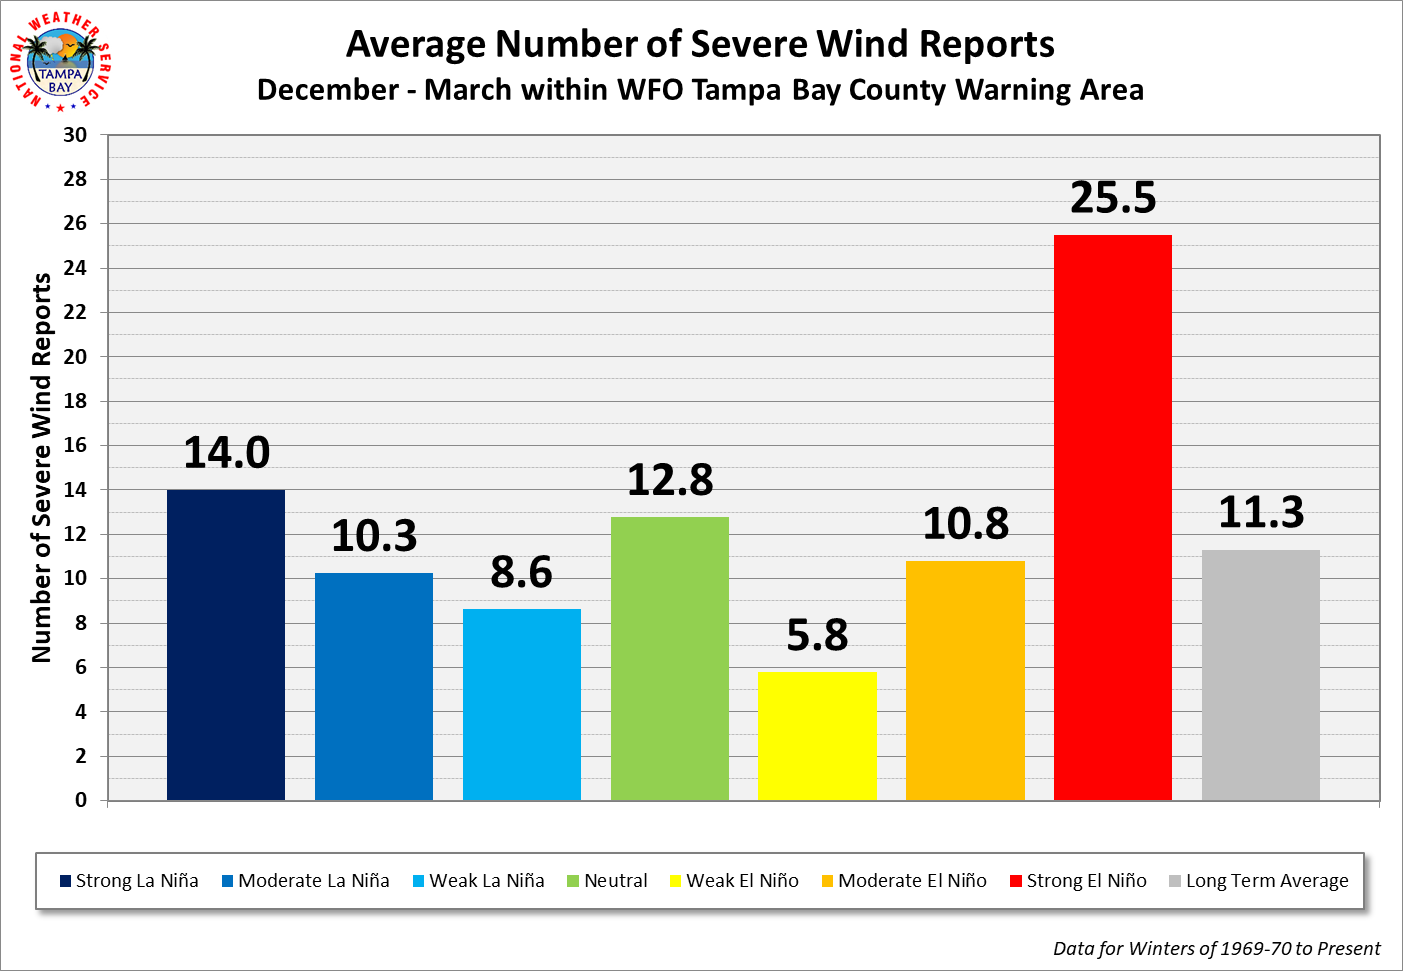 WFO Tampa Bay Average Number of Severe Wind Events per Cool Season by ENSO Category